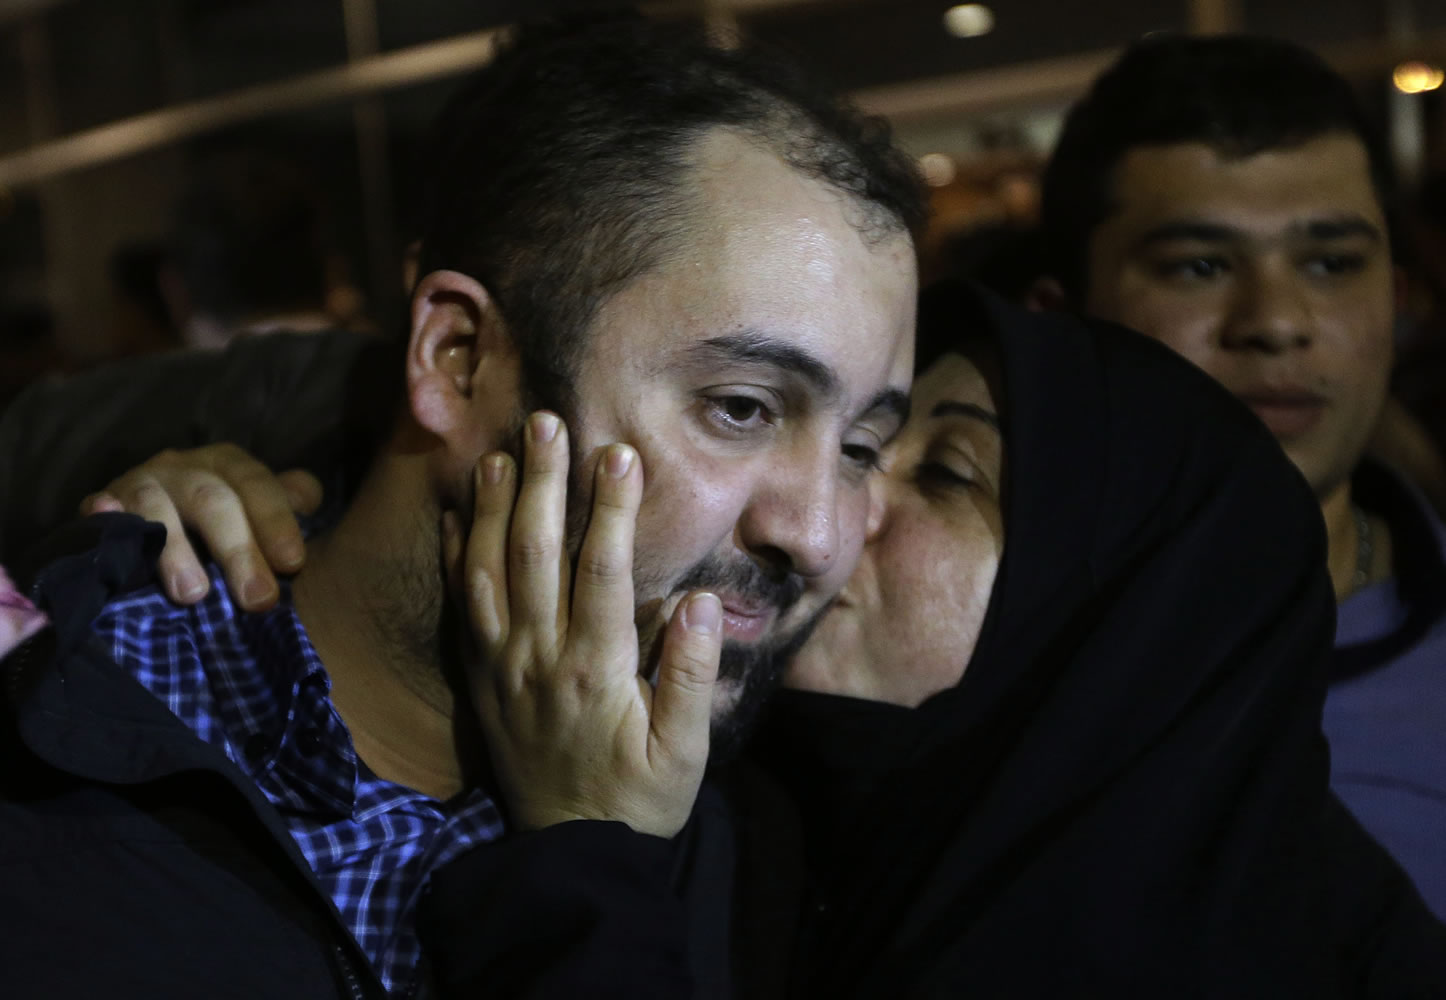 One of the nine released Lebanese Shiite pilgrims who were kidnapped by a rebel faction in northern Syria in May 2012, left, is kissed by his wife, right, upon his arrival at Rafik Hariri international airport, in Beirut, Lebanon, Saturday, Oct. 19, 2013.